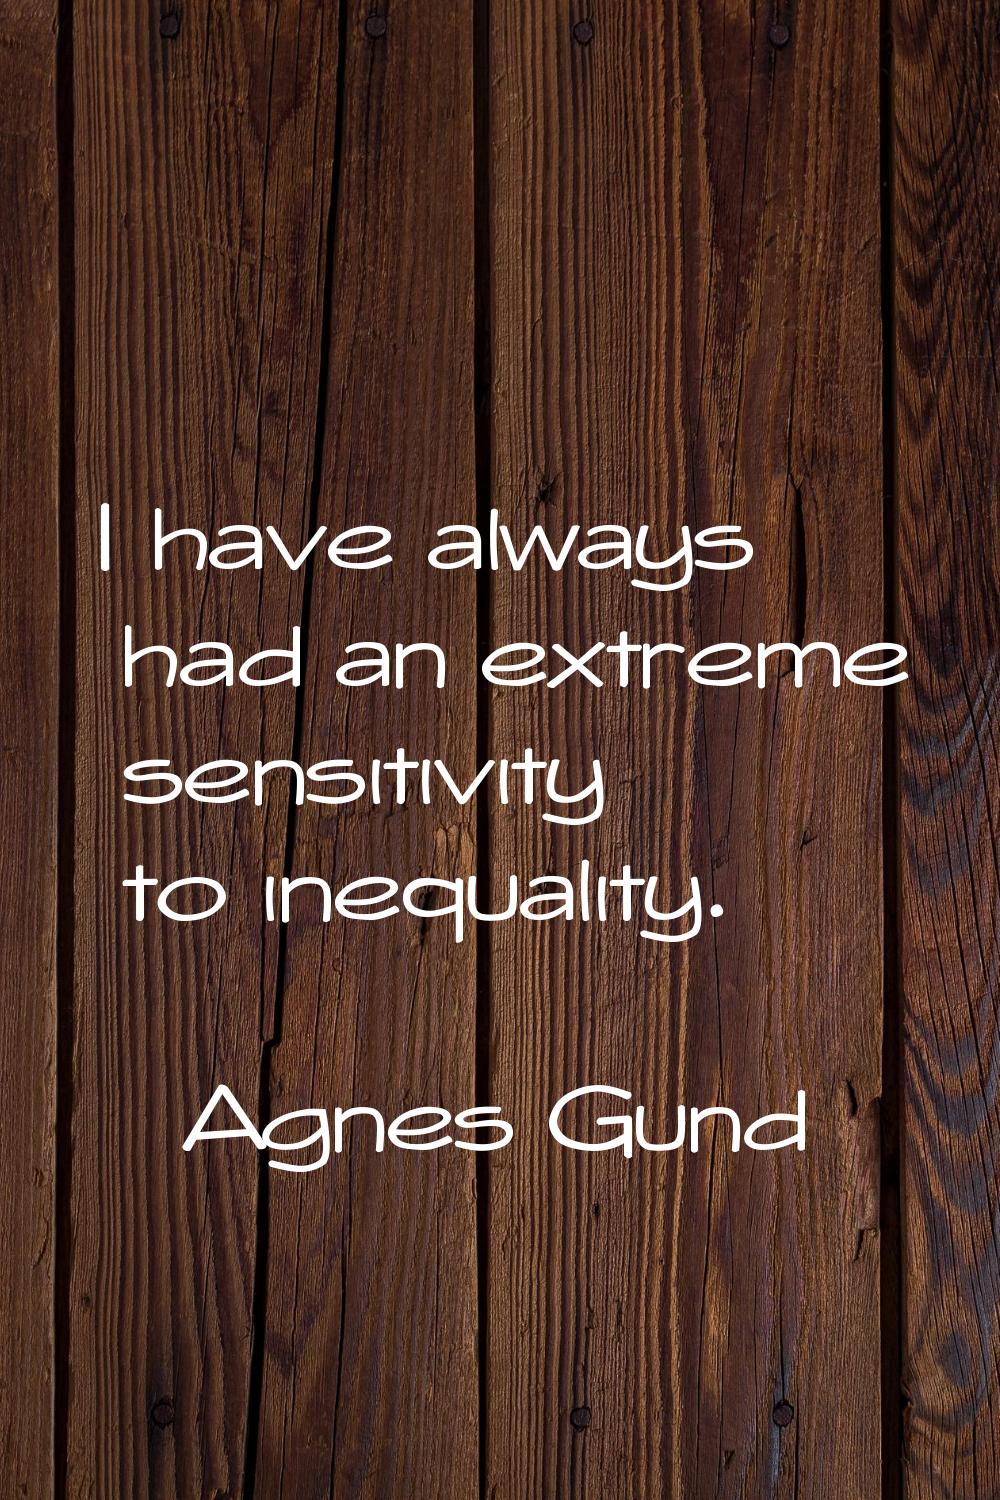 I have always had an extreme sensitivity to inequality.